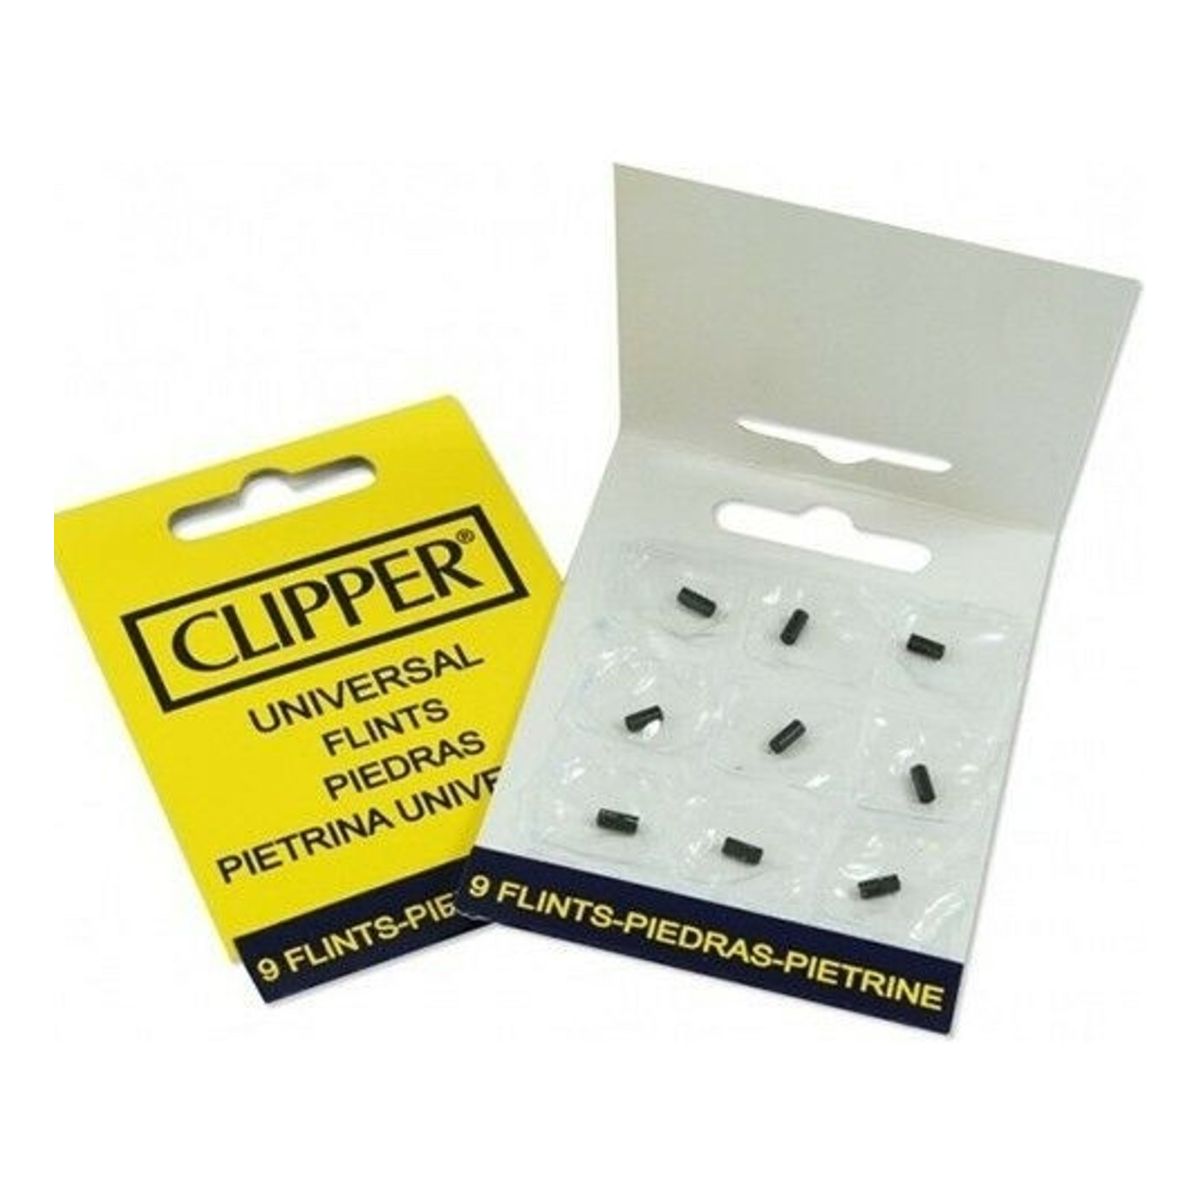 A pack of Clipper - Lighter Flints For All Lighters Types in a package.